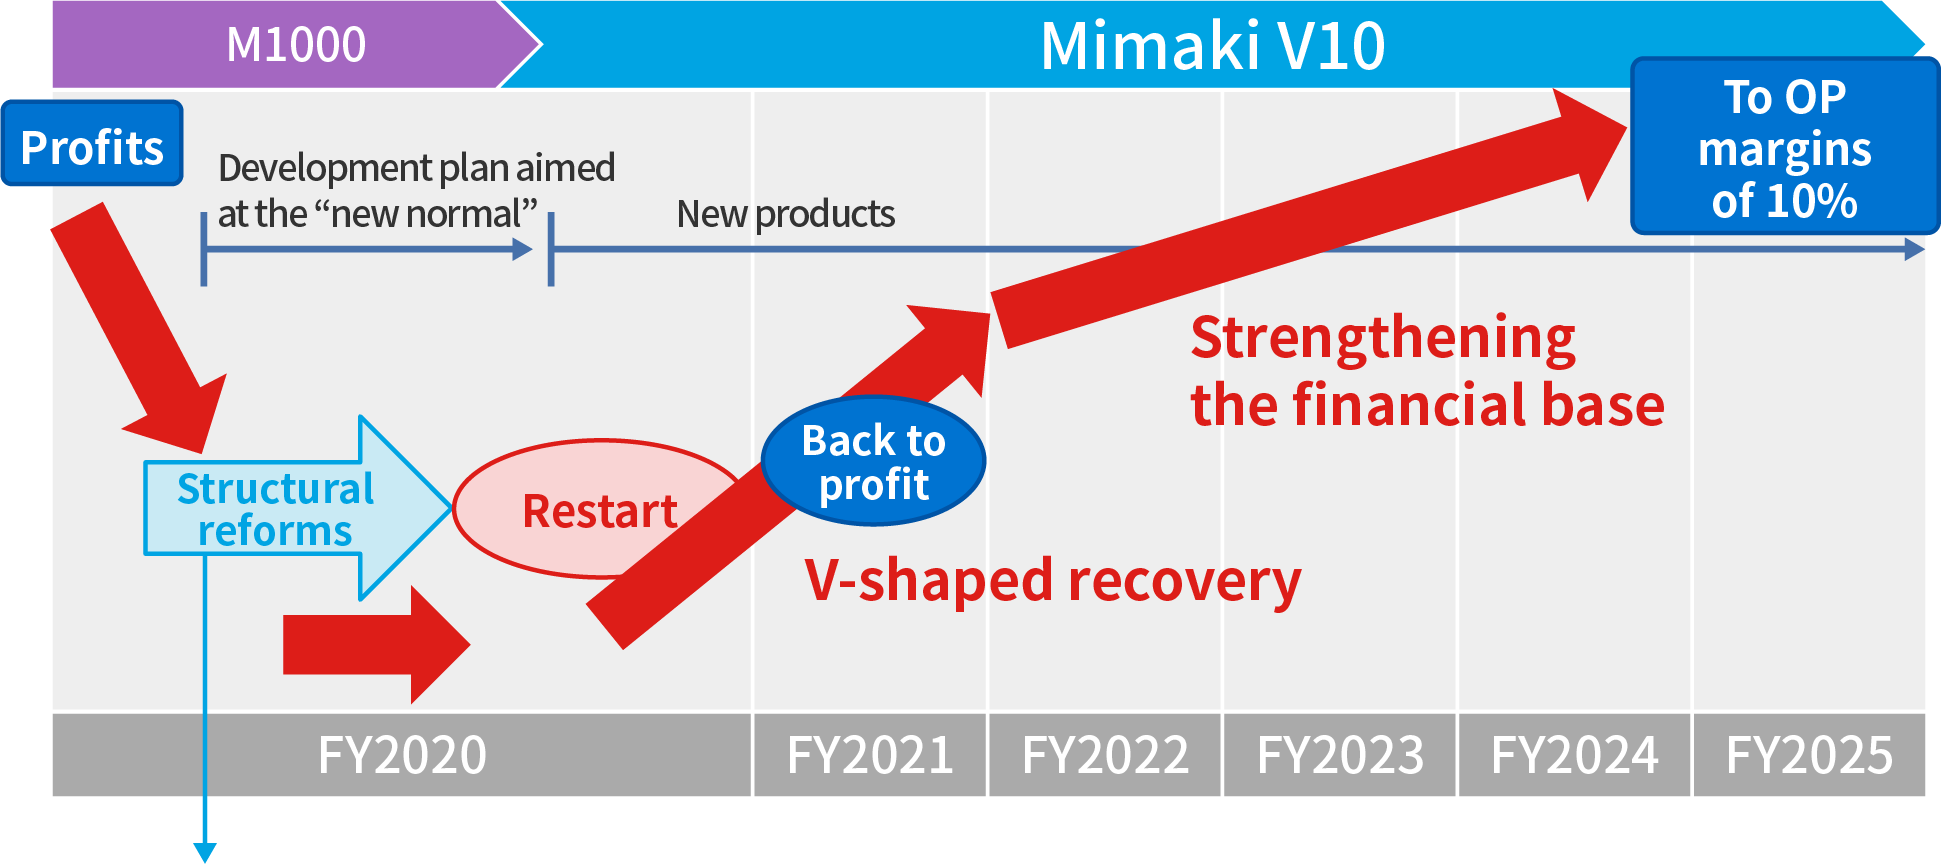 What to aim for with Mimaki V10